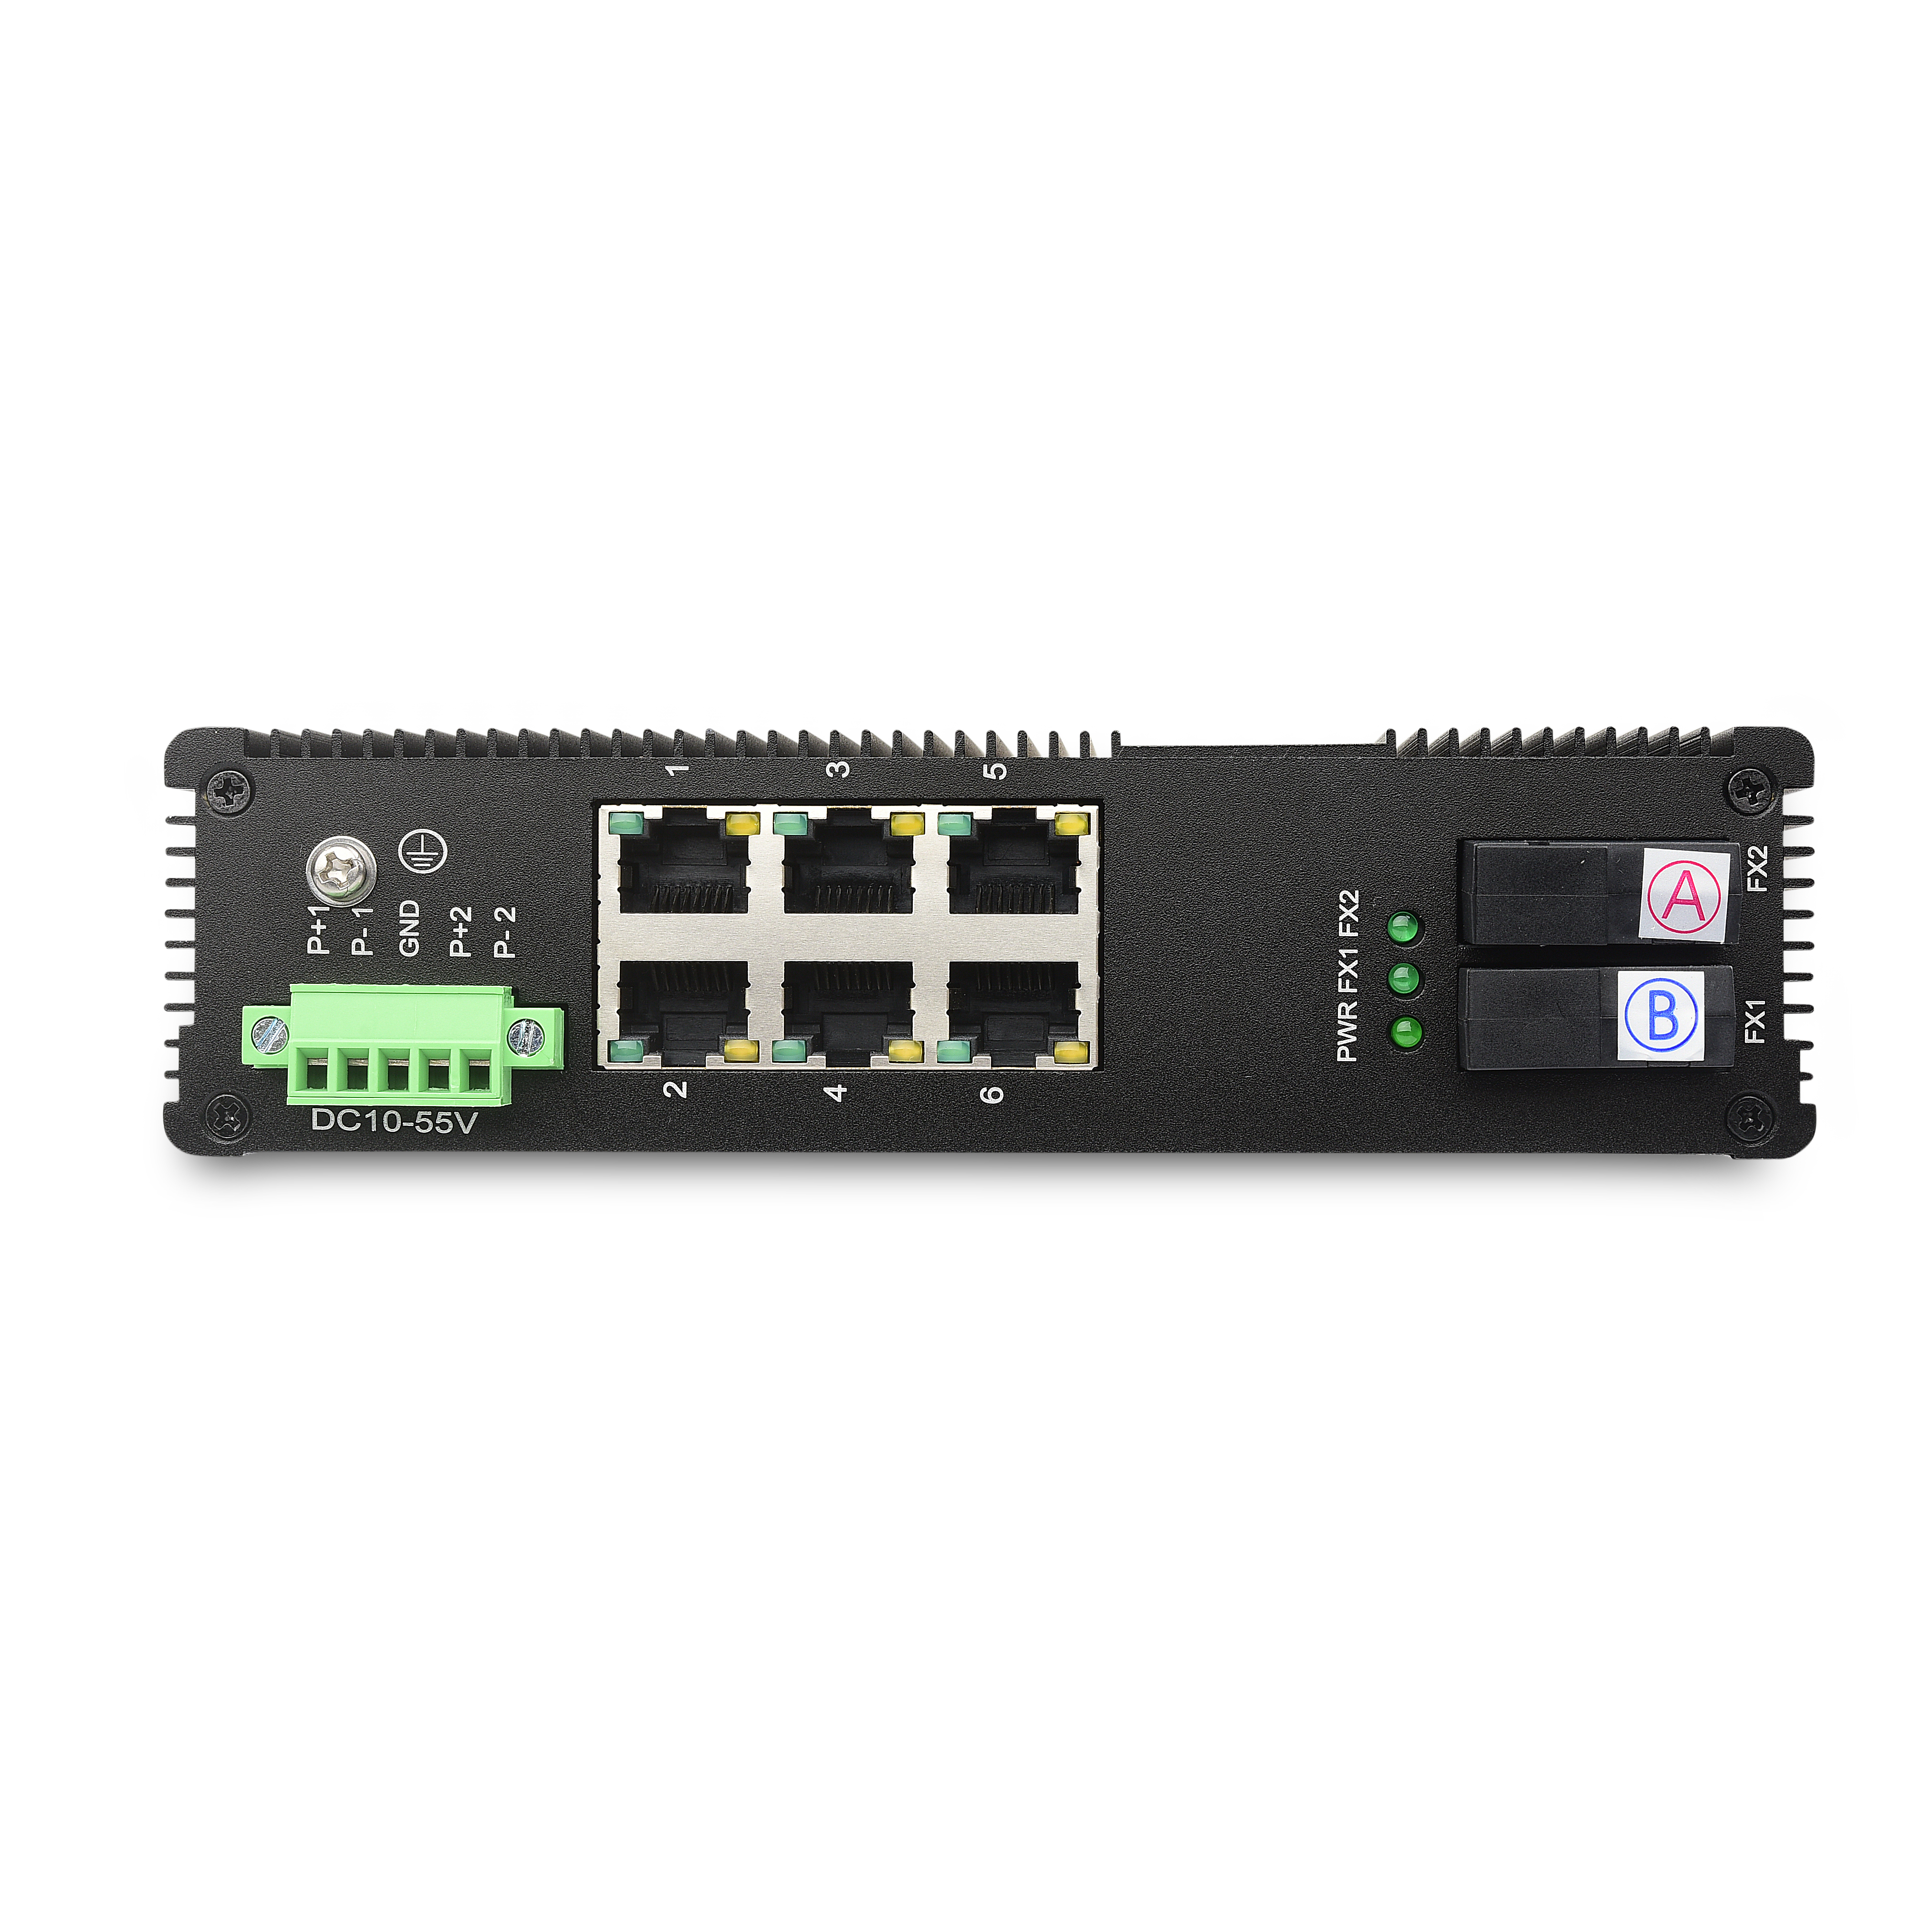 Super Lowest Price 1000m Port Switch - 6 10/100TX PoE/PoE+ and 2 100FX | Unmanaged Industrial PoE Switch JHA-IF26HP  – JHA